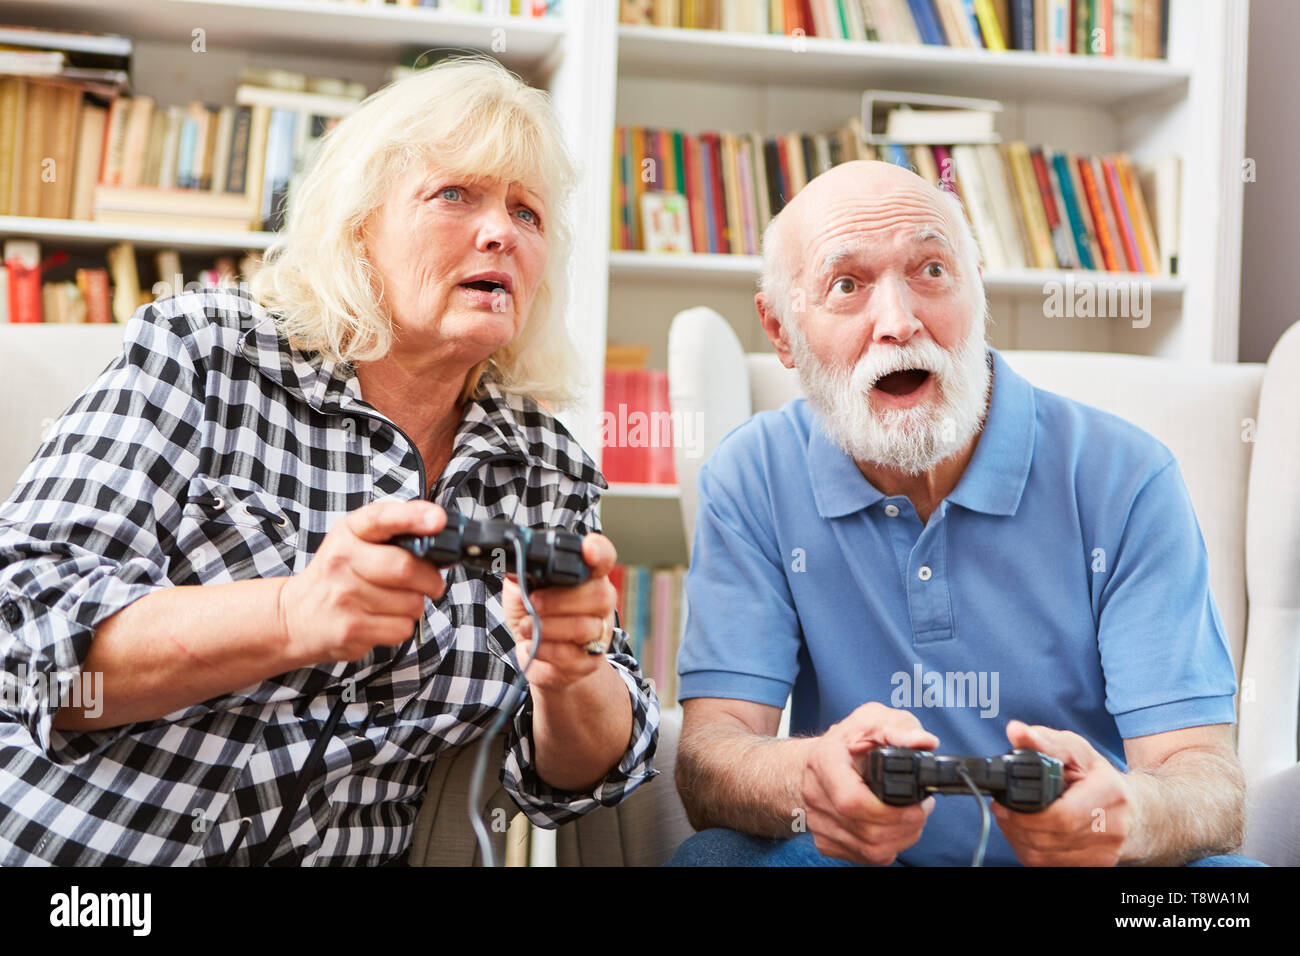 Senior couple in video game competition against each other full of excitement Stock Photo